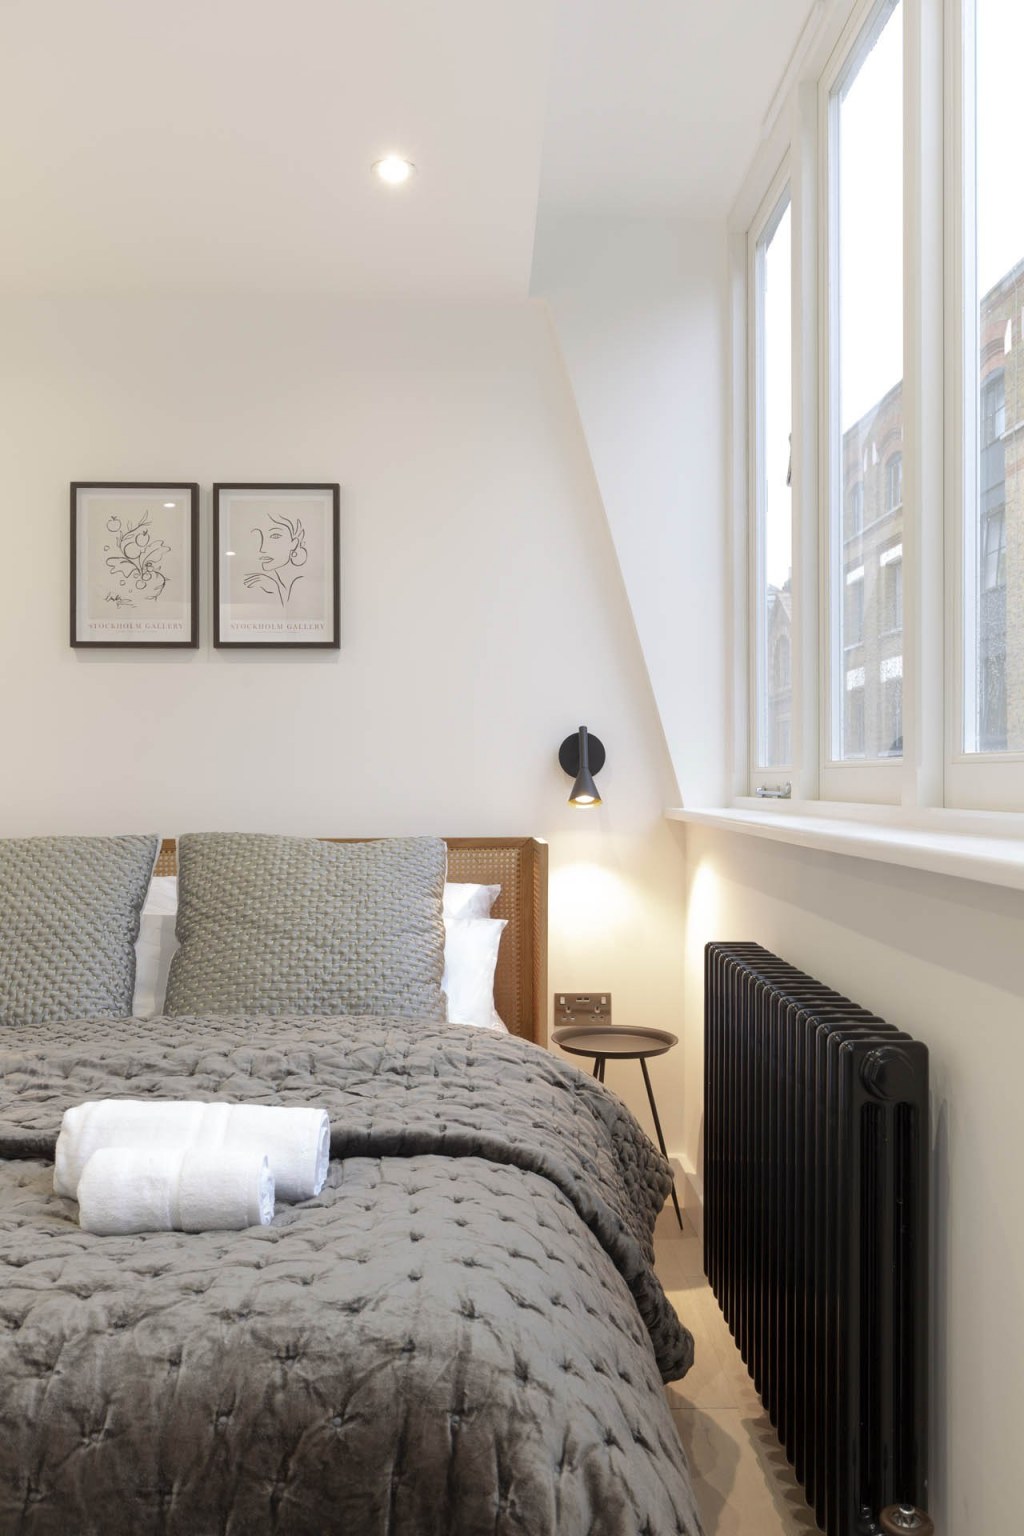 Residential Development - Shoreditch, Central London. / Bedroom of Flat 1